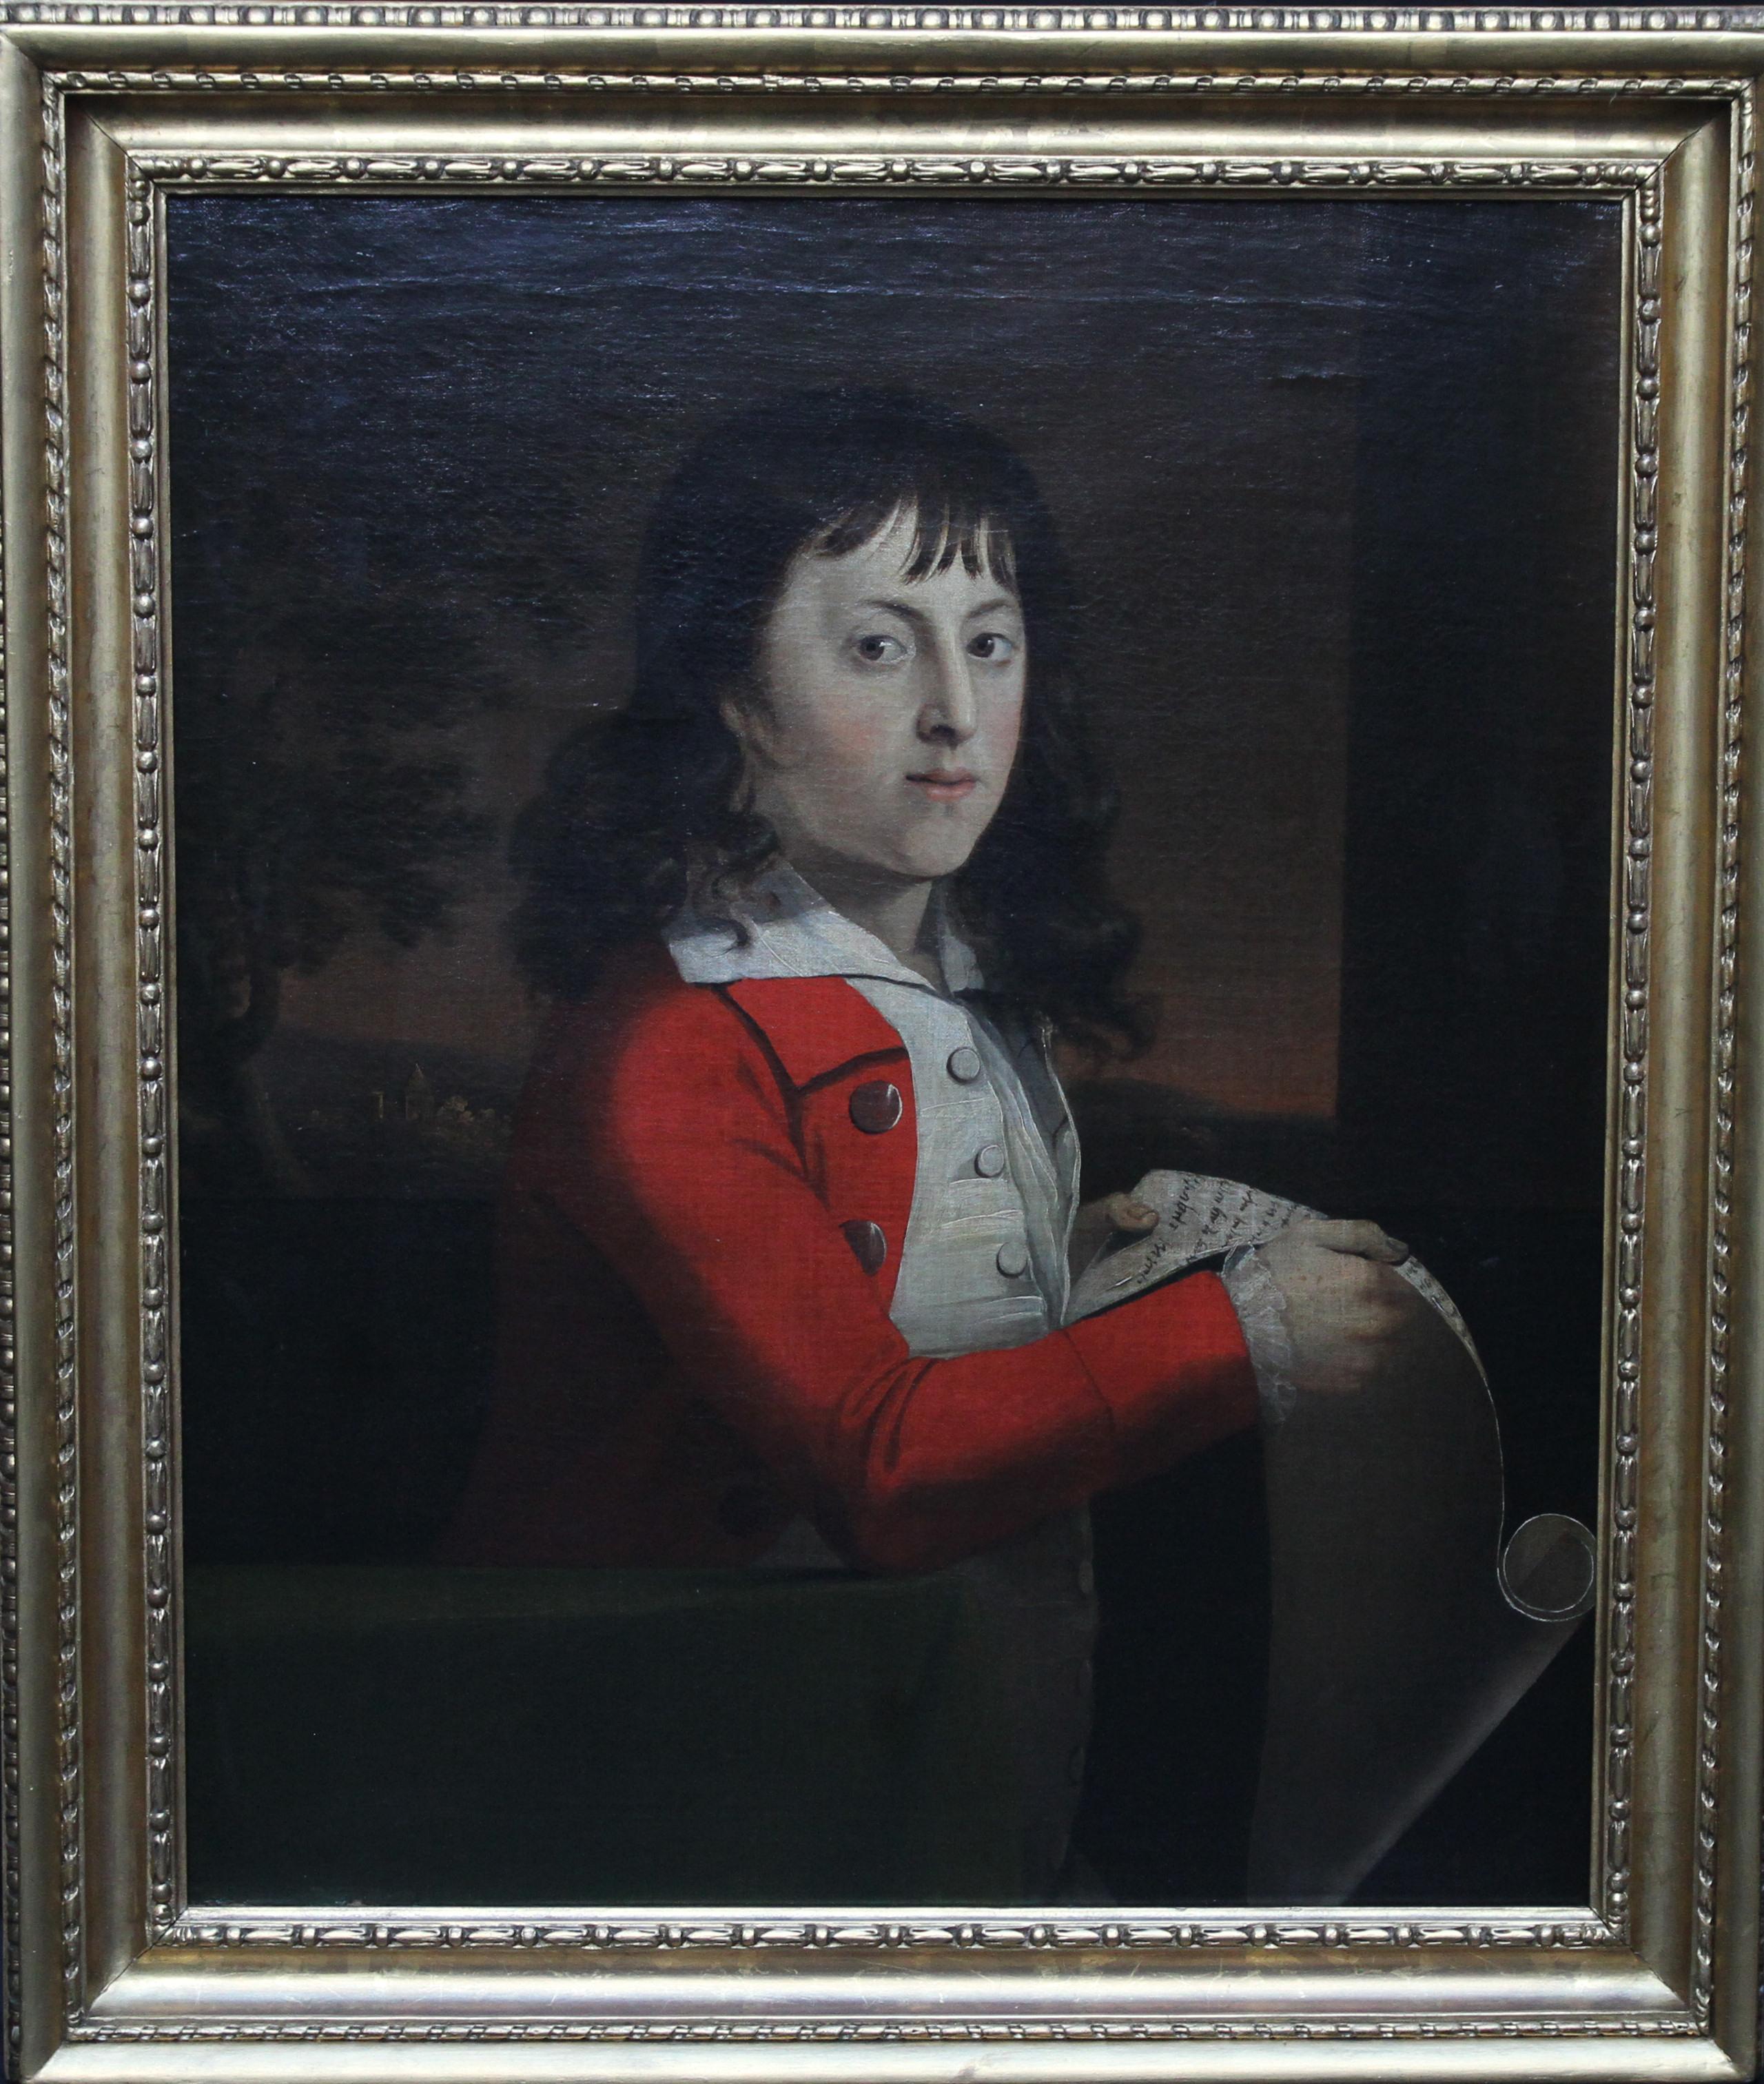 Attributed to Alexander Nasmyth Portrait Painting - Portrait of a Young Boy Thomas Wagstaff - Scottish art 18th century oil painting